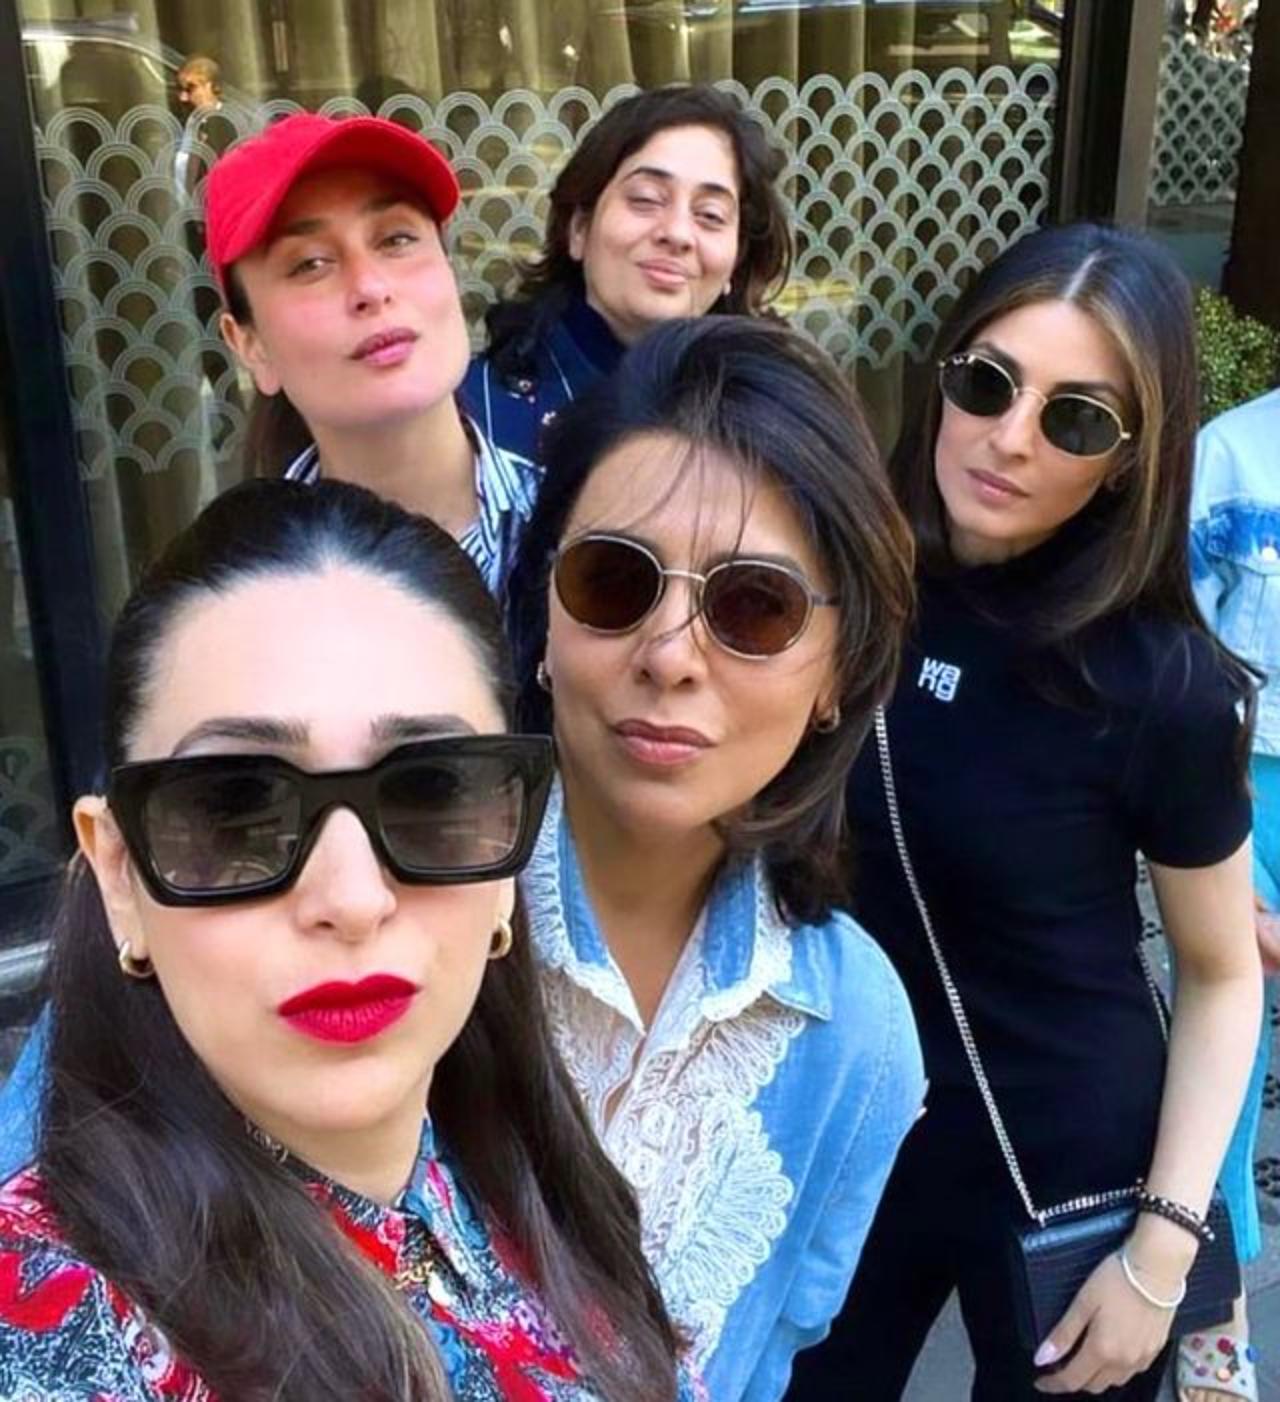 This cute picture shared by Neetu Kapoor is from their family vacation. She is seen posing with Kareena Kapoor, Karisma Kapoor and her daughter Riddhima in the photo